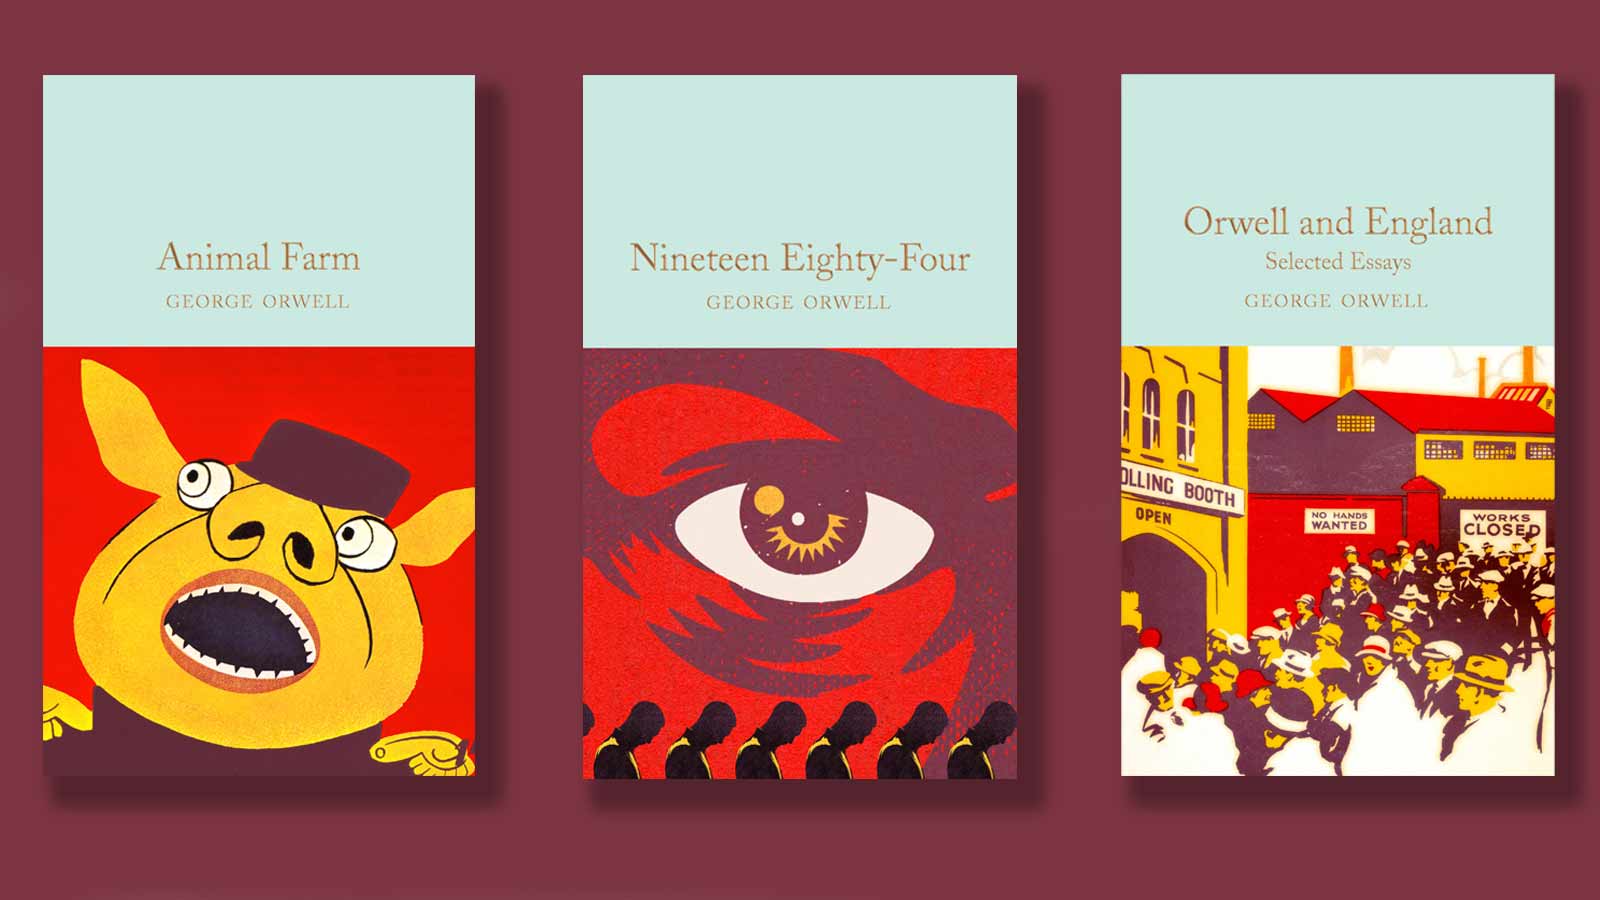 Animal Farm, 1984 and Orwell and England book covers